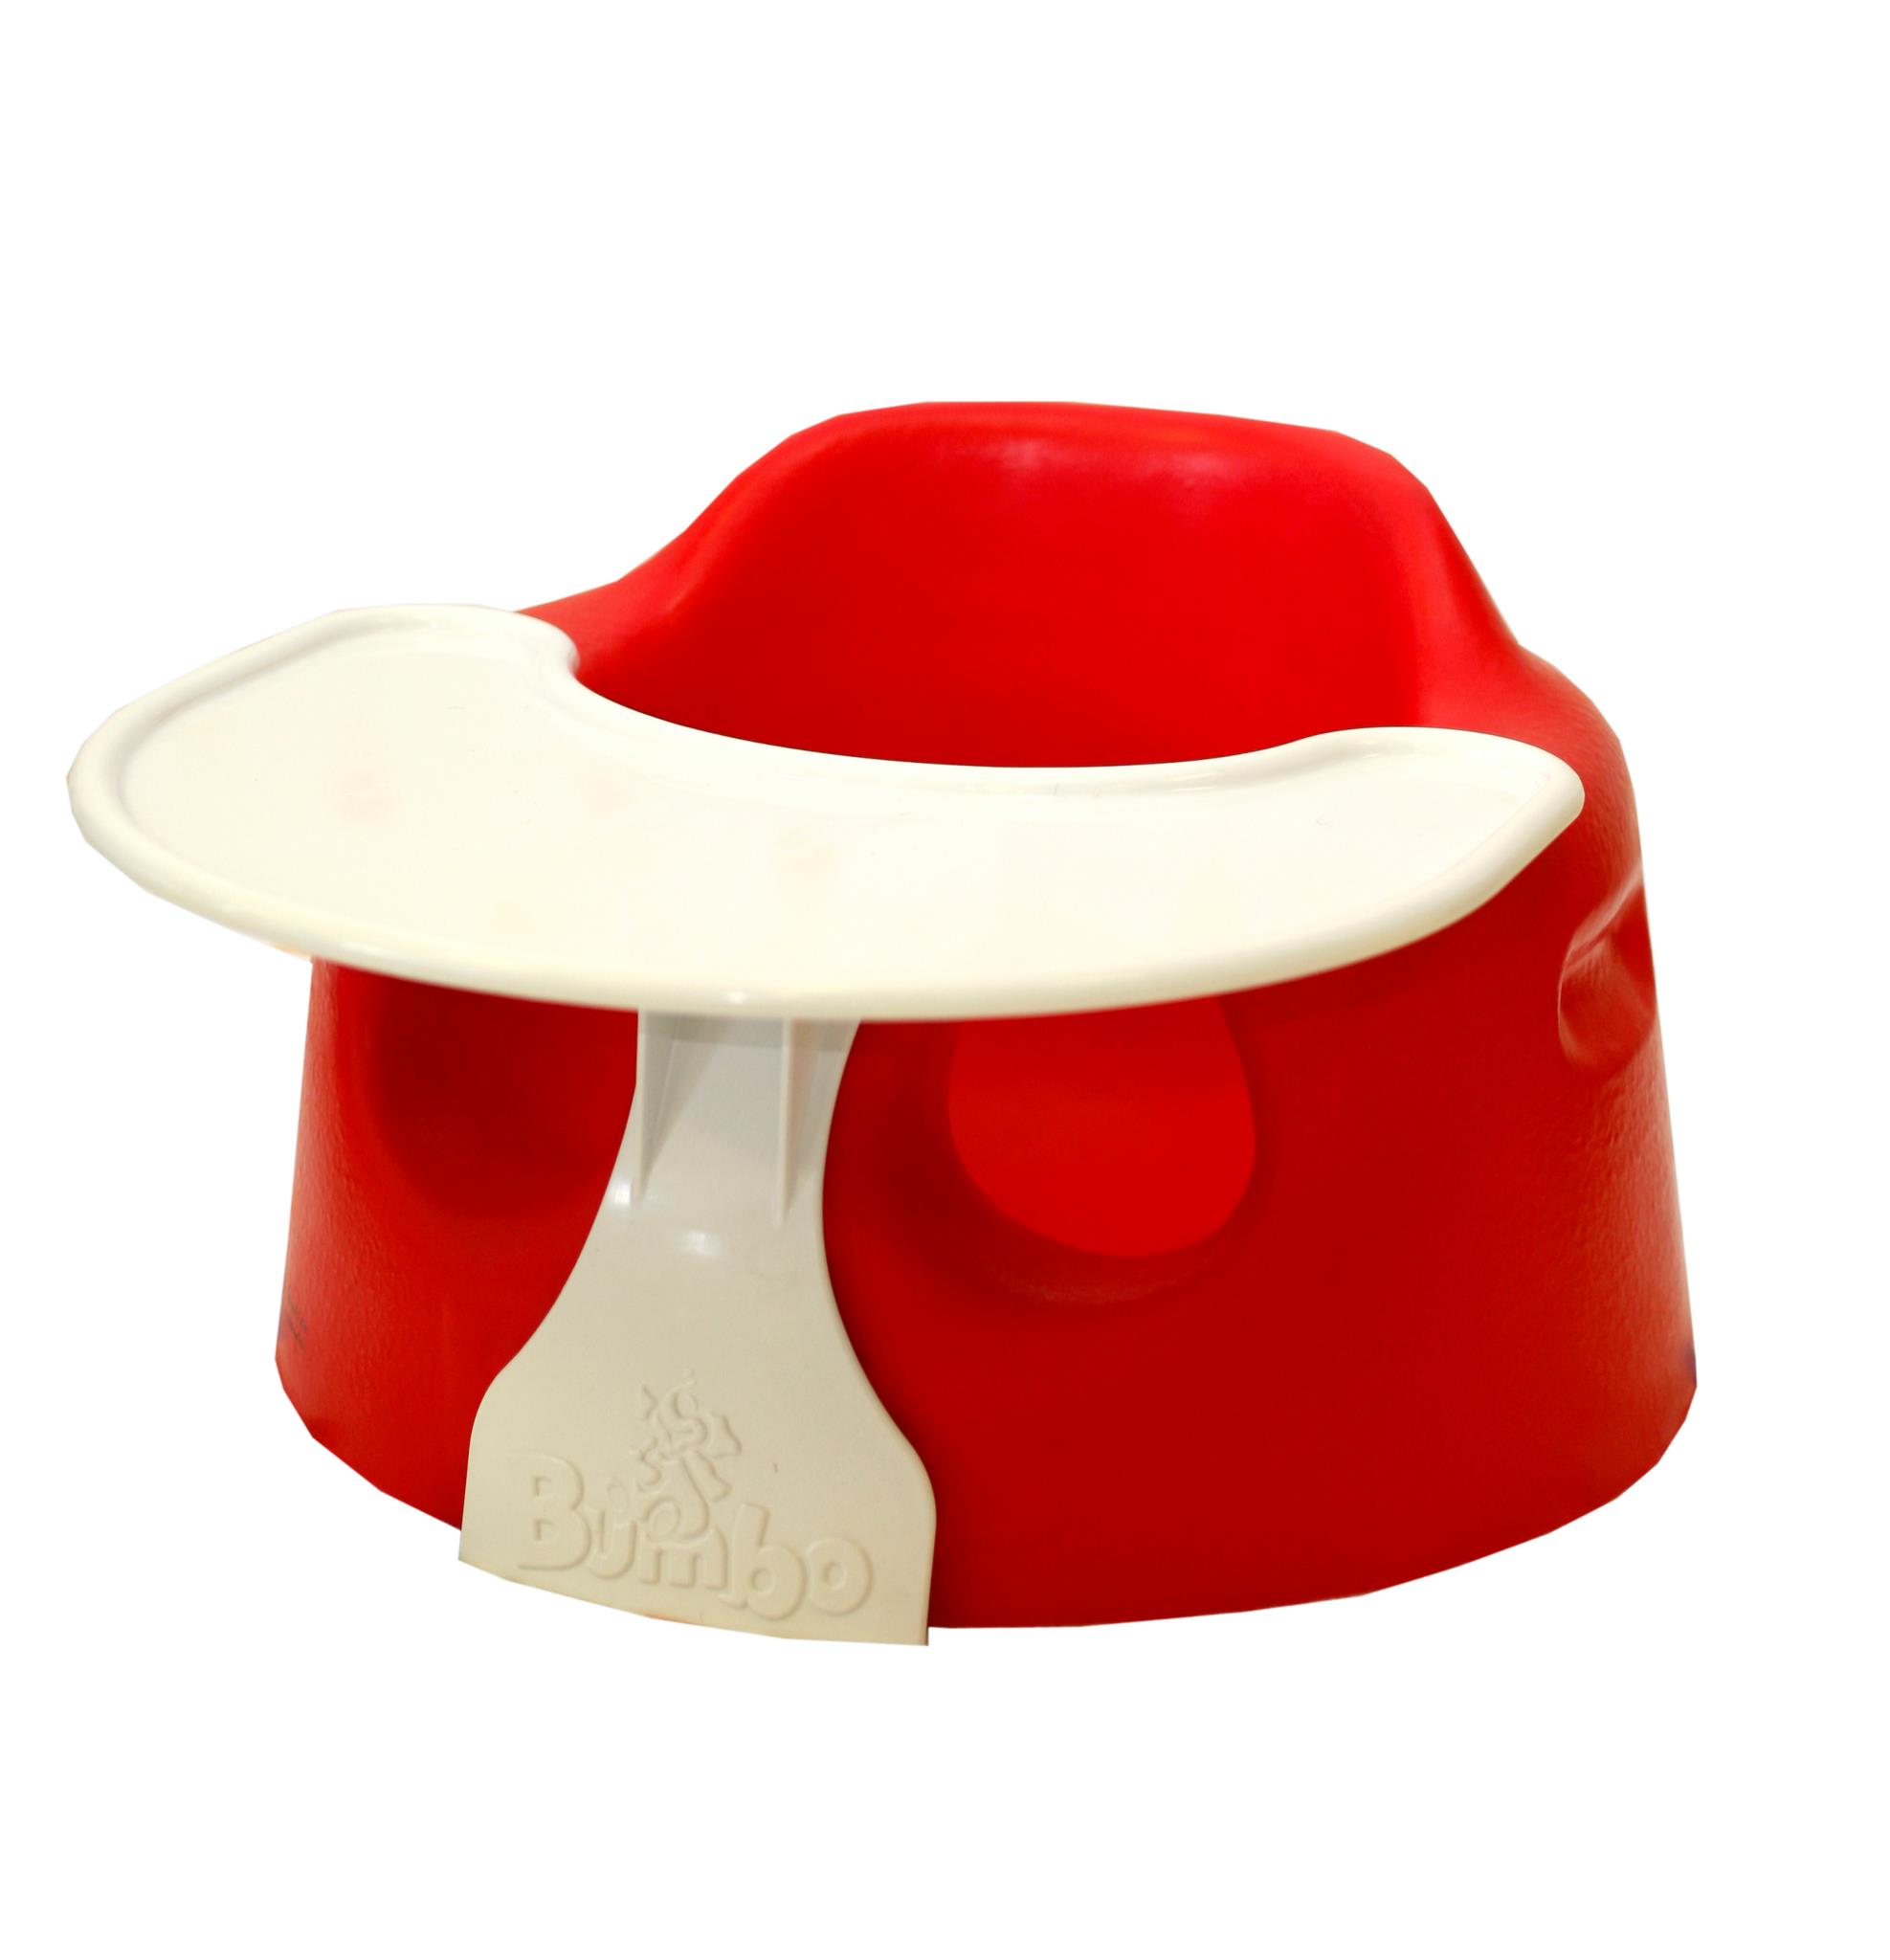 bumbo seat and play tray